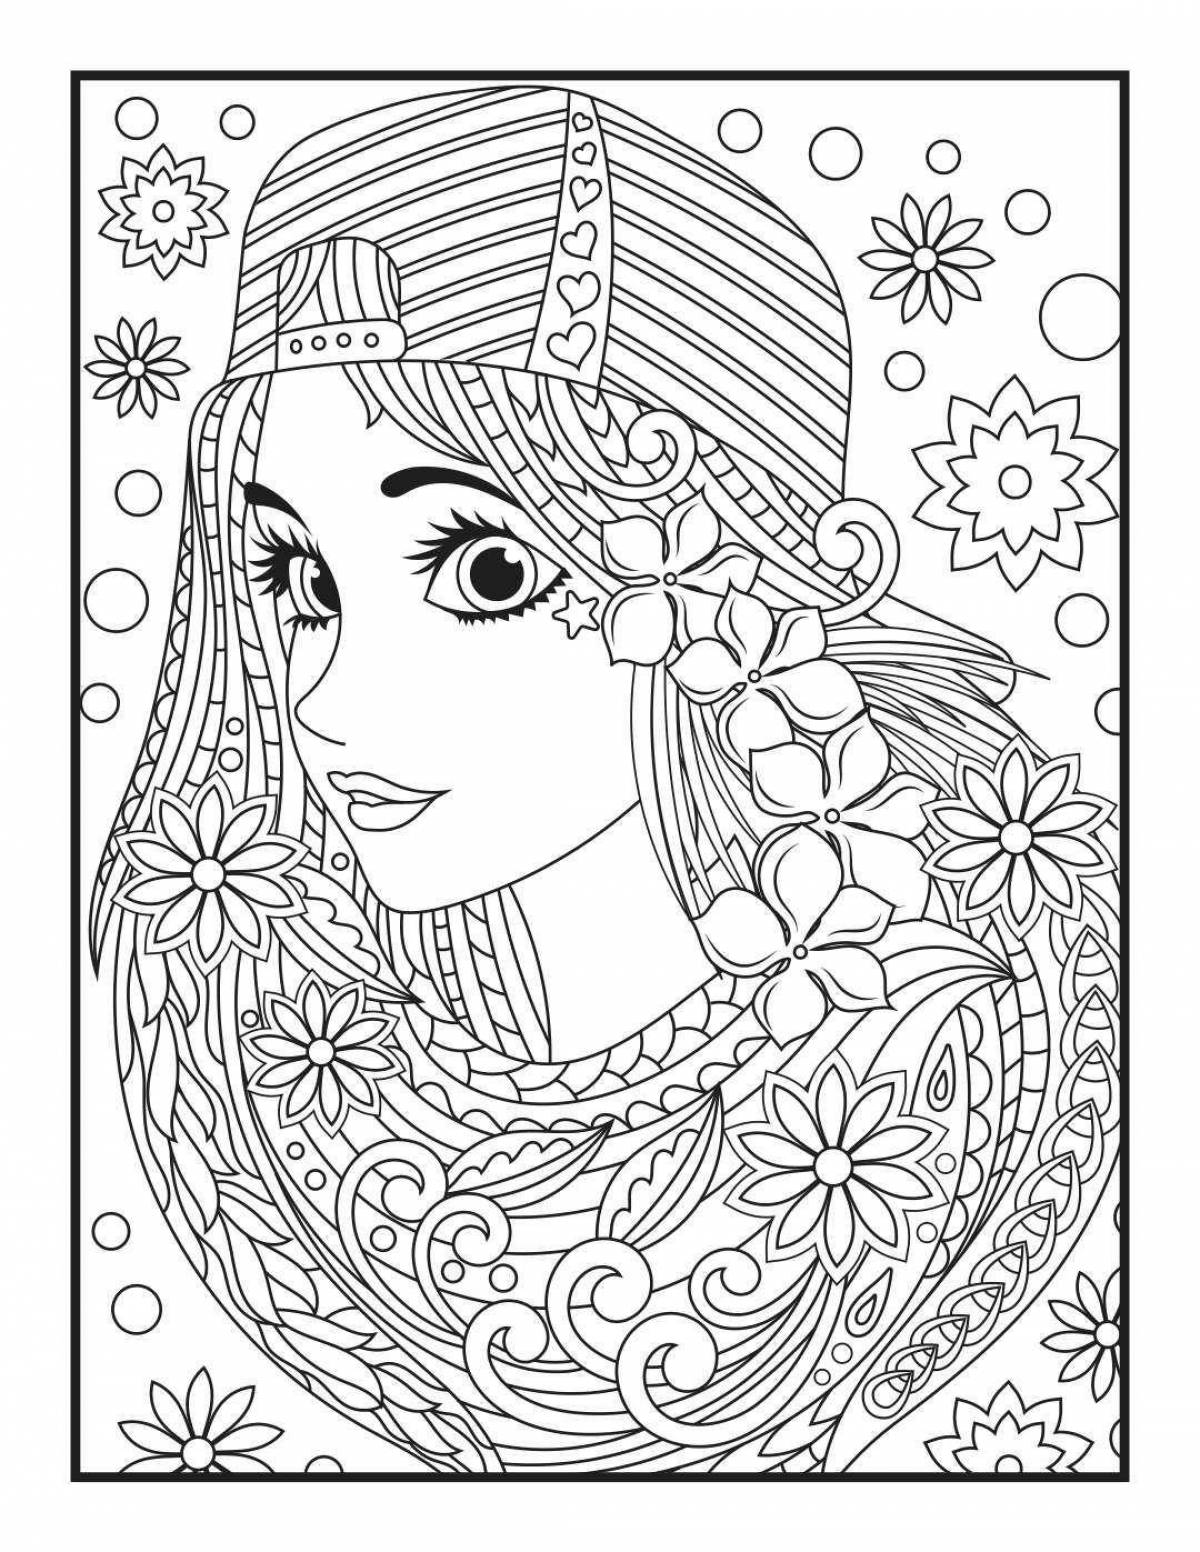 Glowing winter portrait coloring page